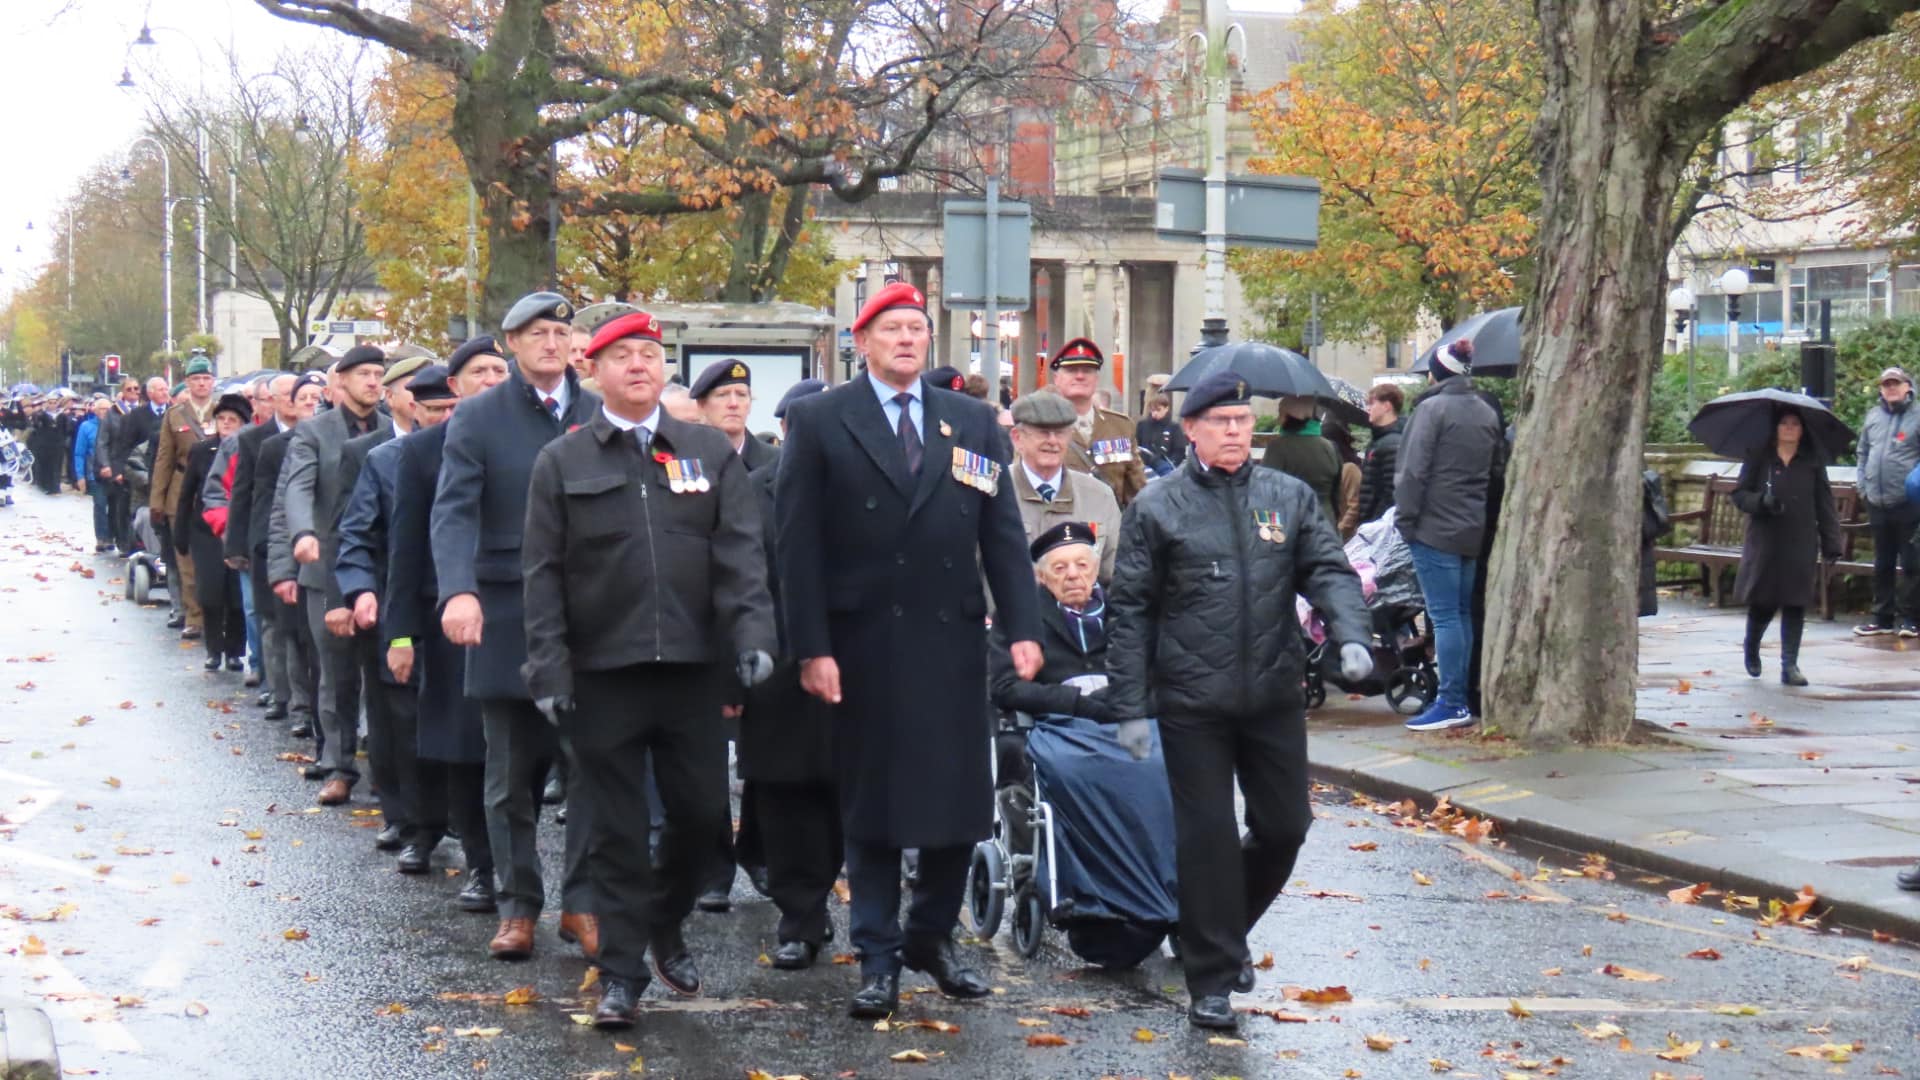 Hundreds of people attended the Remembrance Sunday parade and service in Southport. Photo by Andrew Brown Stand Up For Southport 